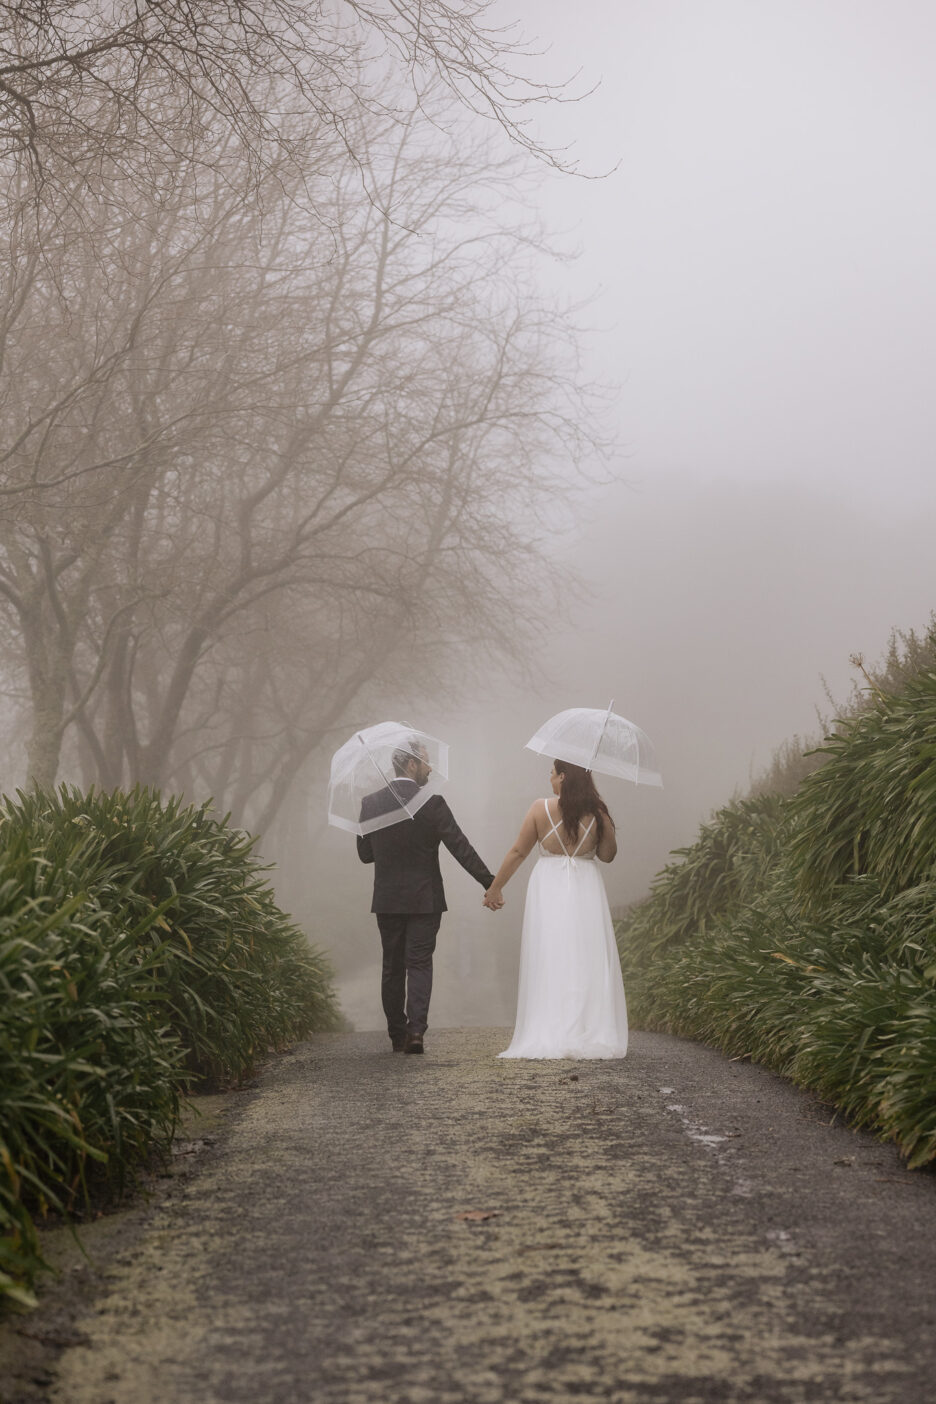 Bride and groom walking away holding hands on driveway in the rain and fog on a winter day